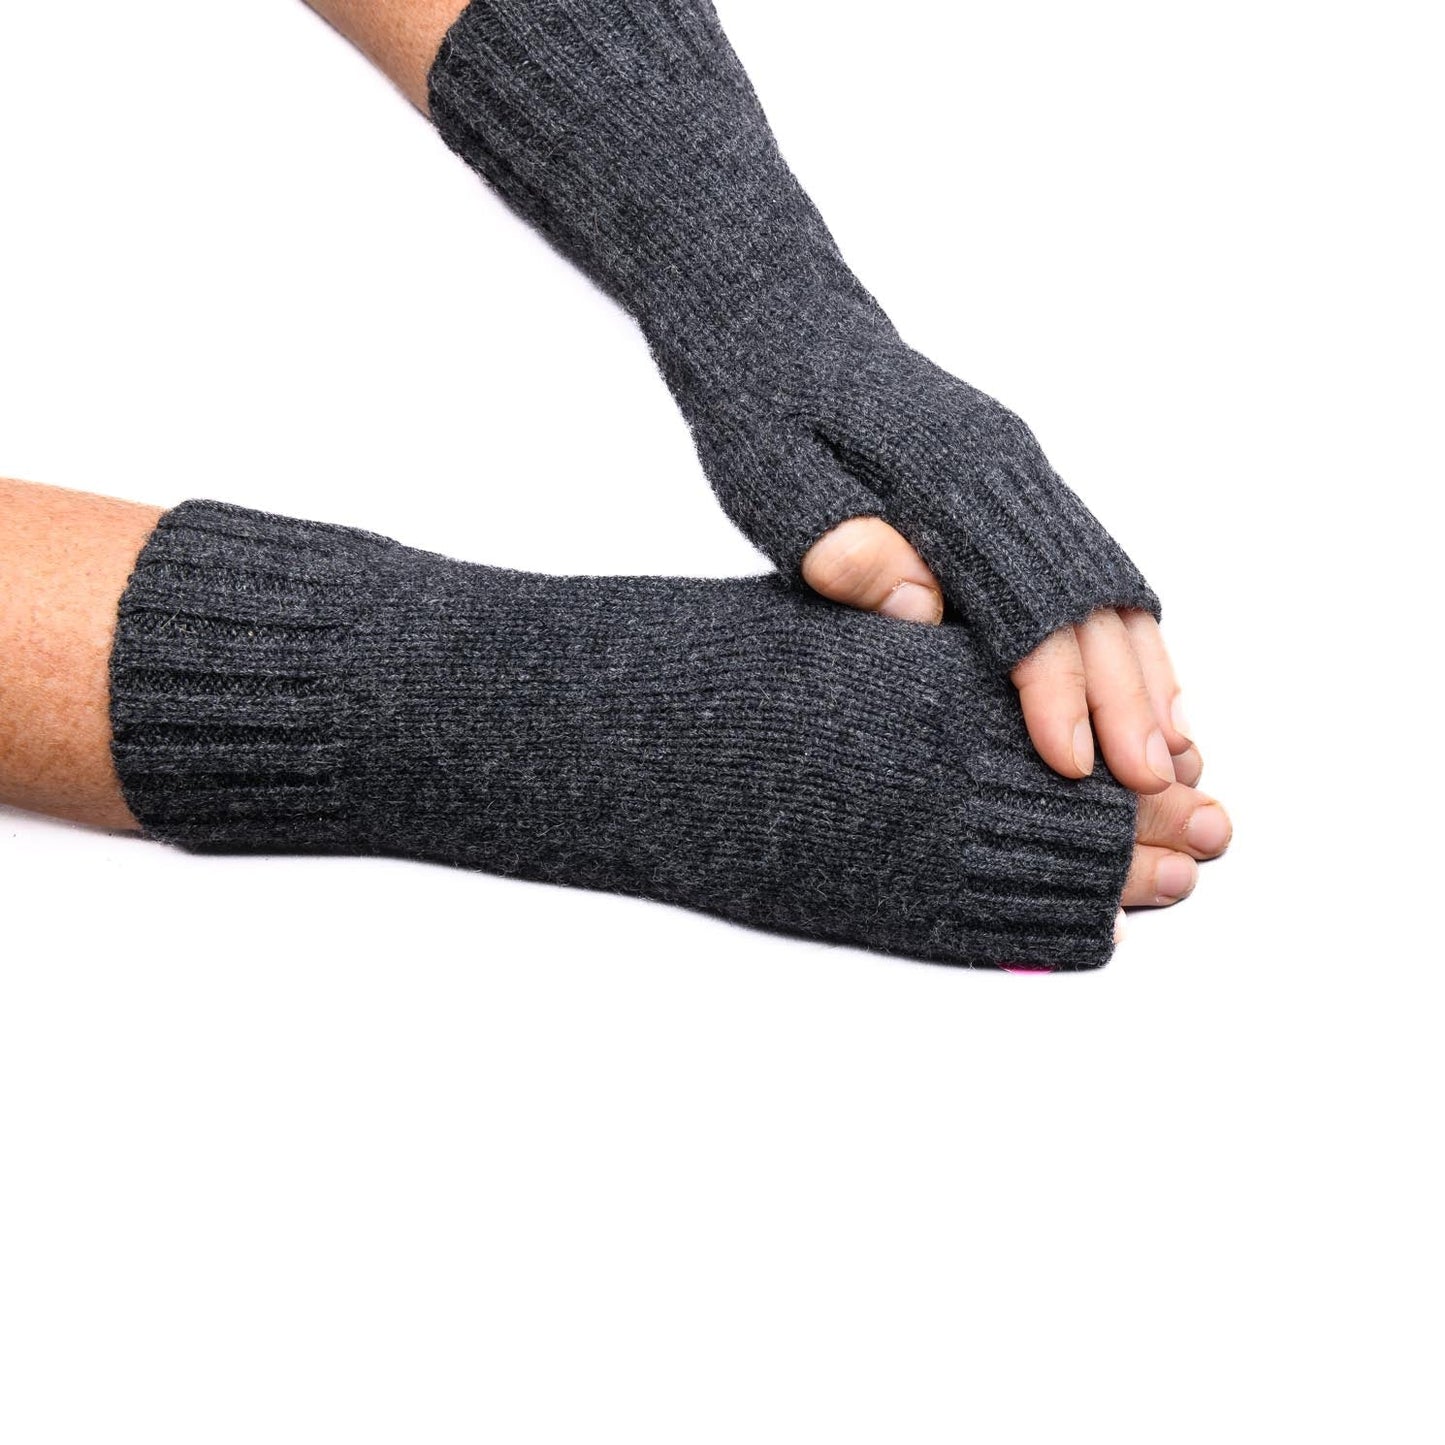 Gotta Hand it to YOU 100% Pure Cashmere Fingerless Glove, Pine Green